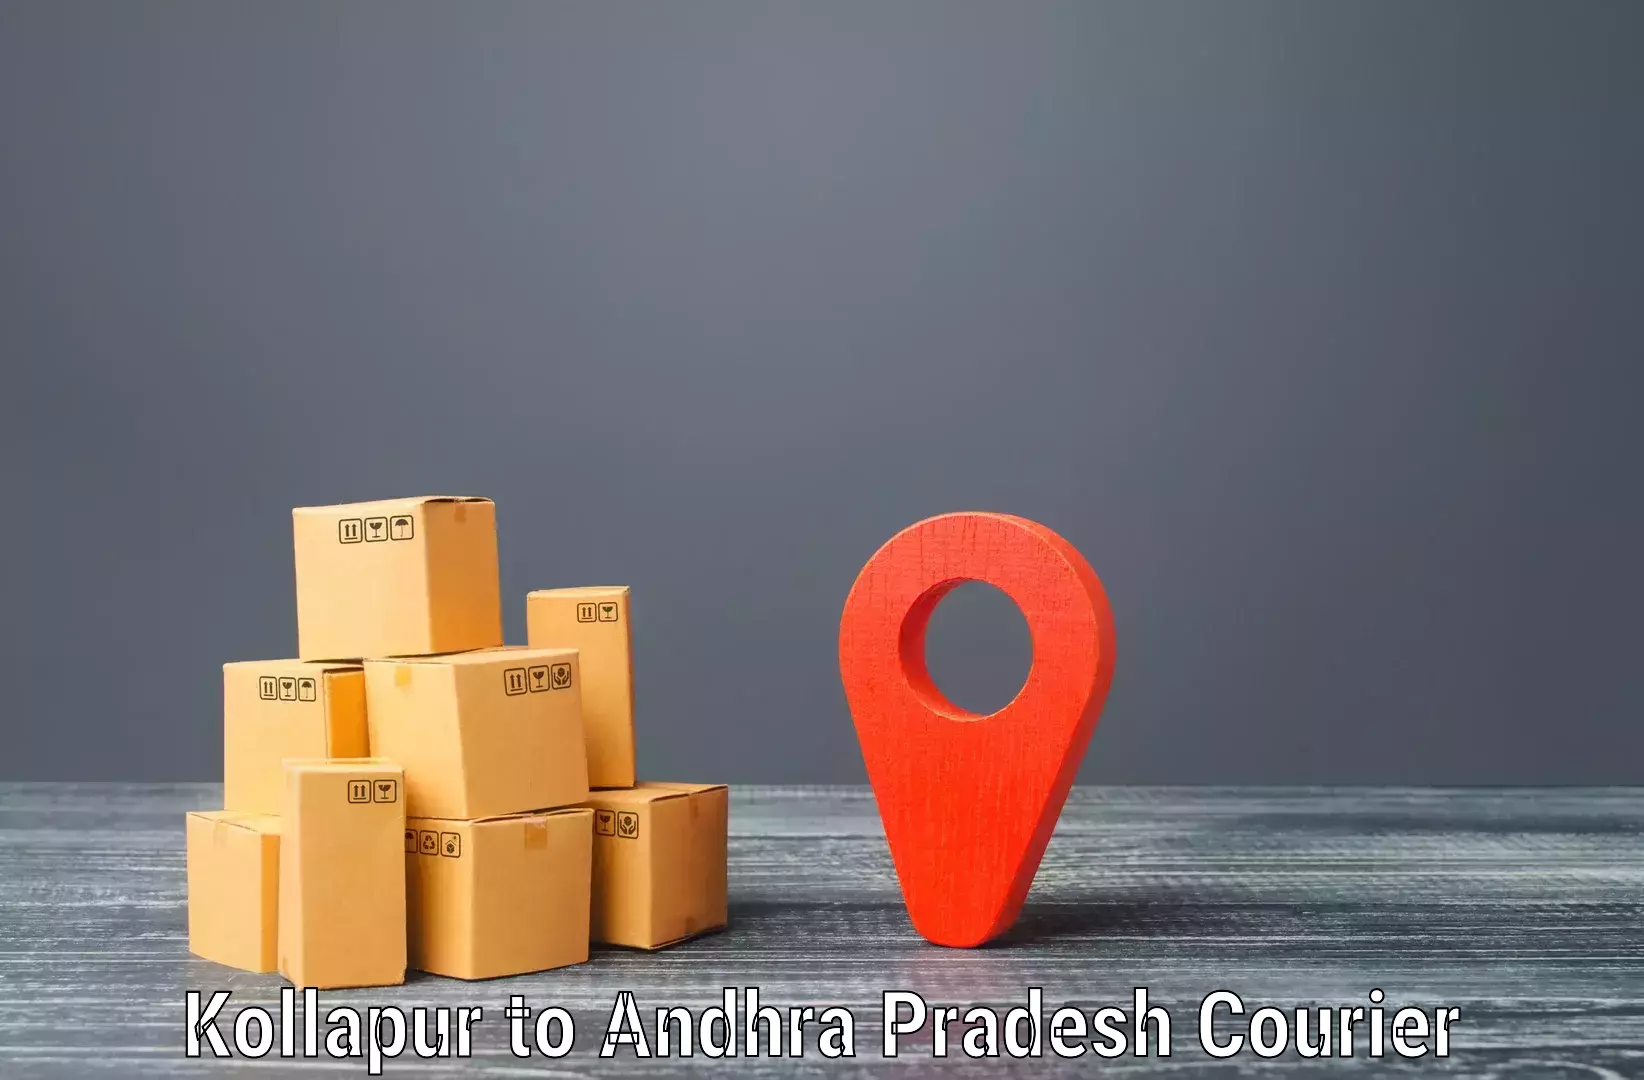 Local delivery service Kollapur to Mangalagiri